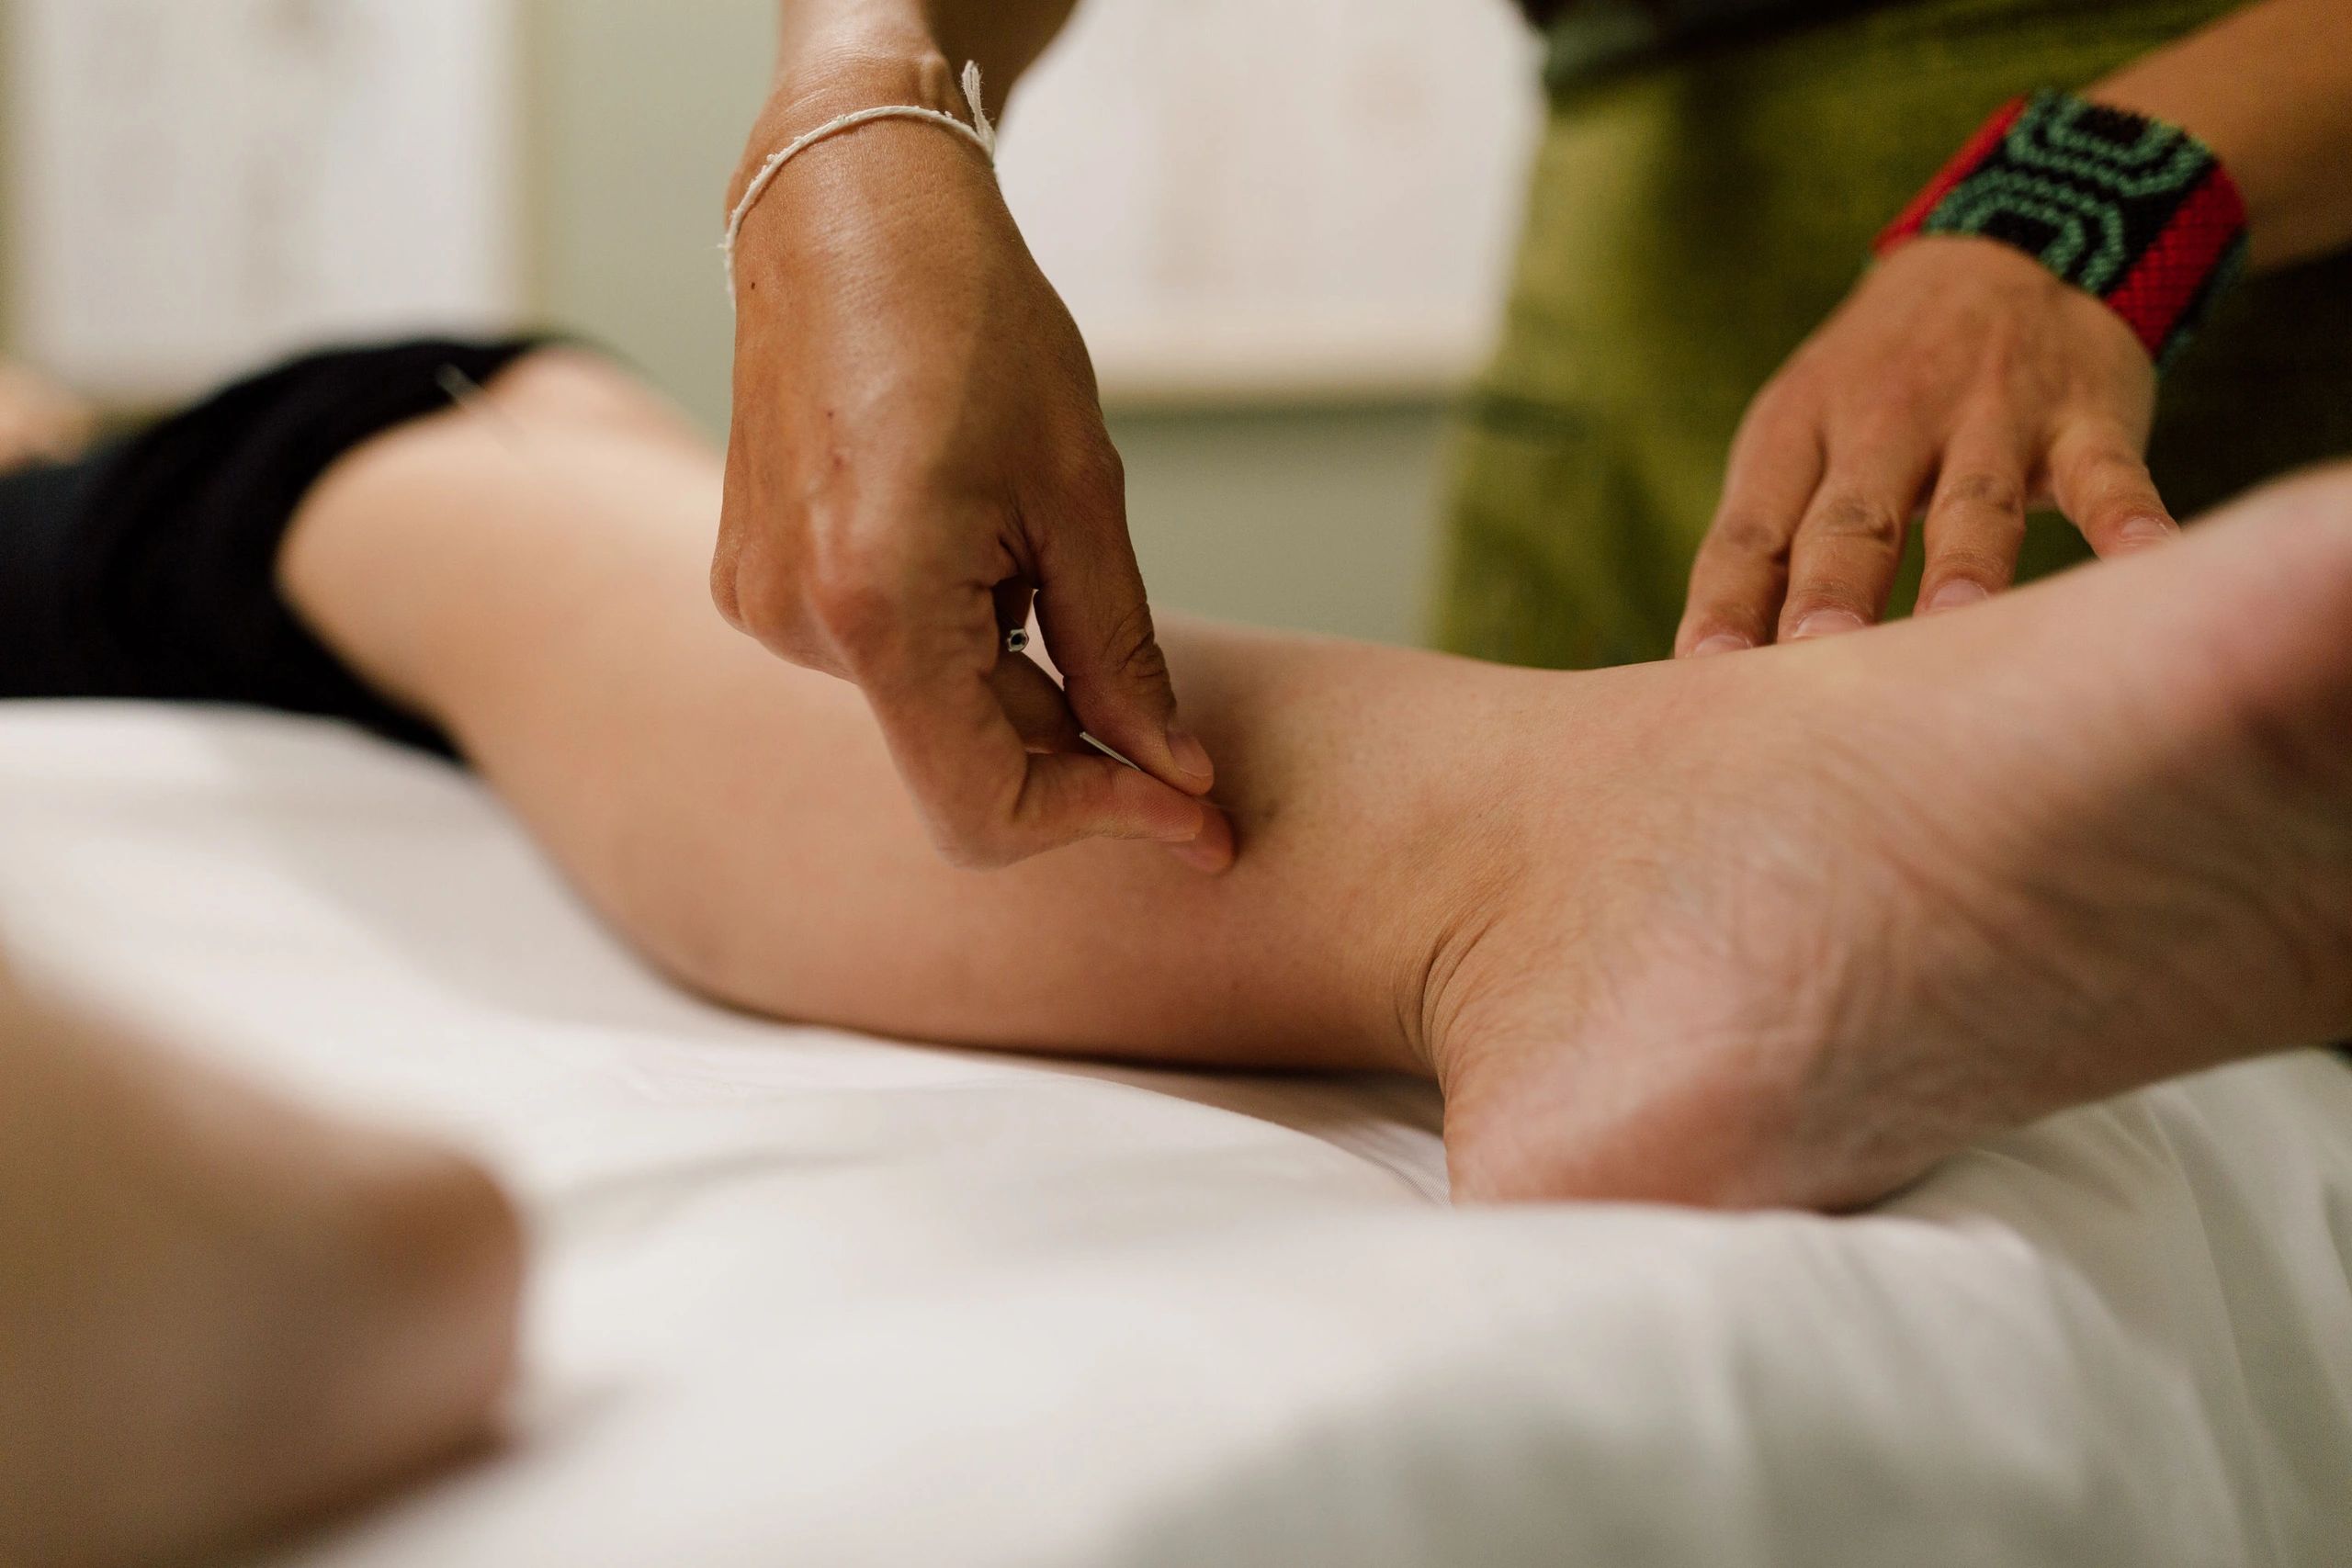 acupuncture needle being inserted on the leg